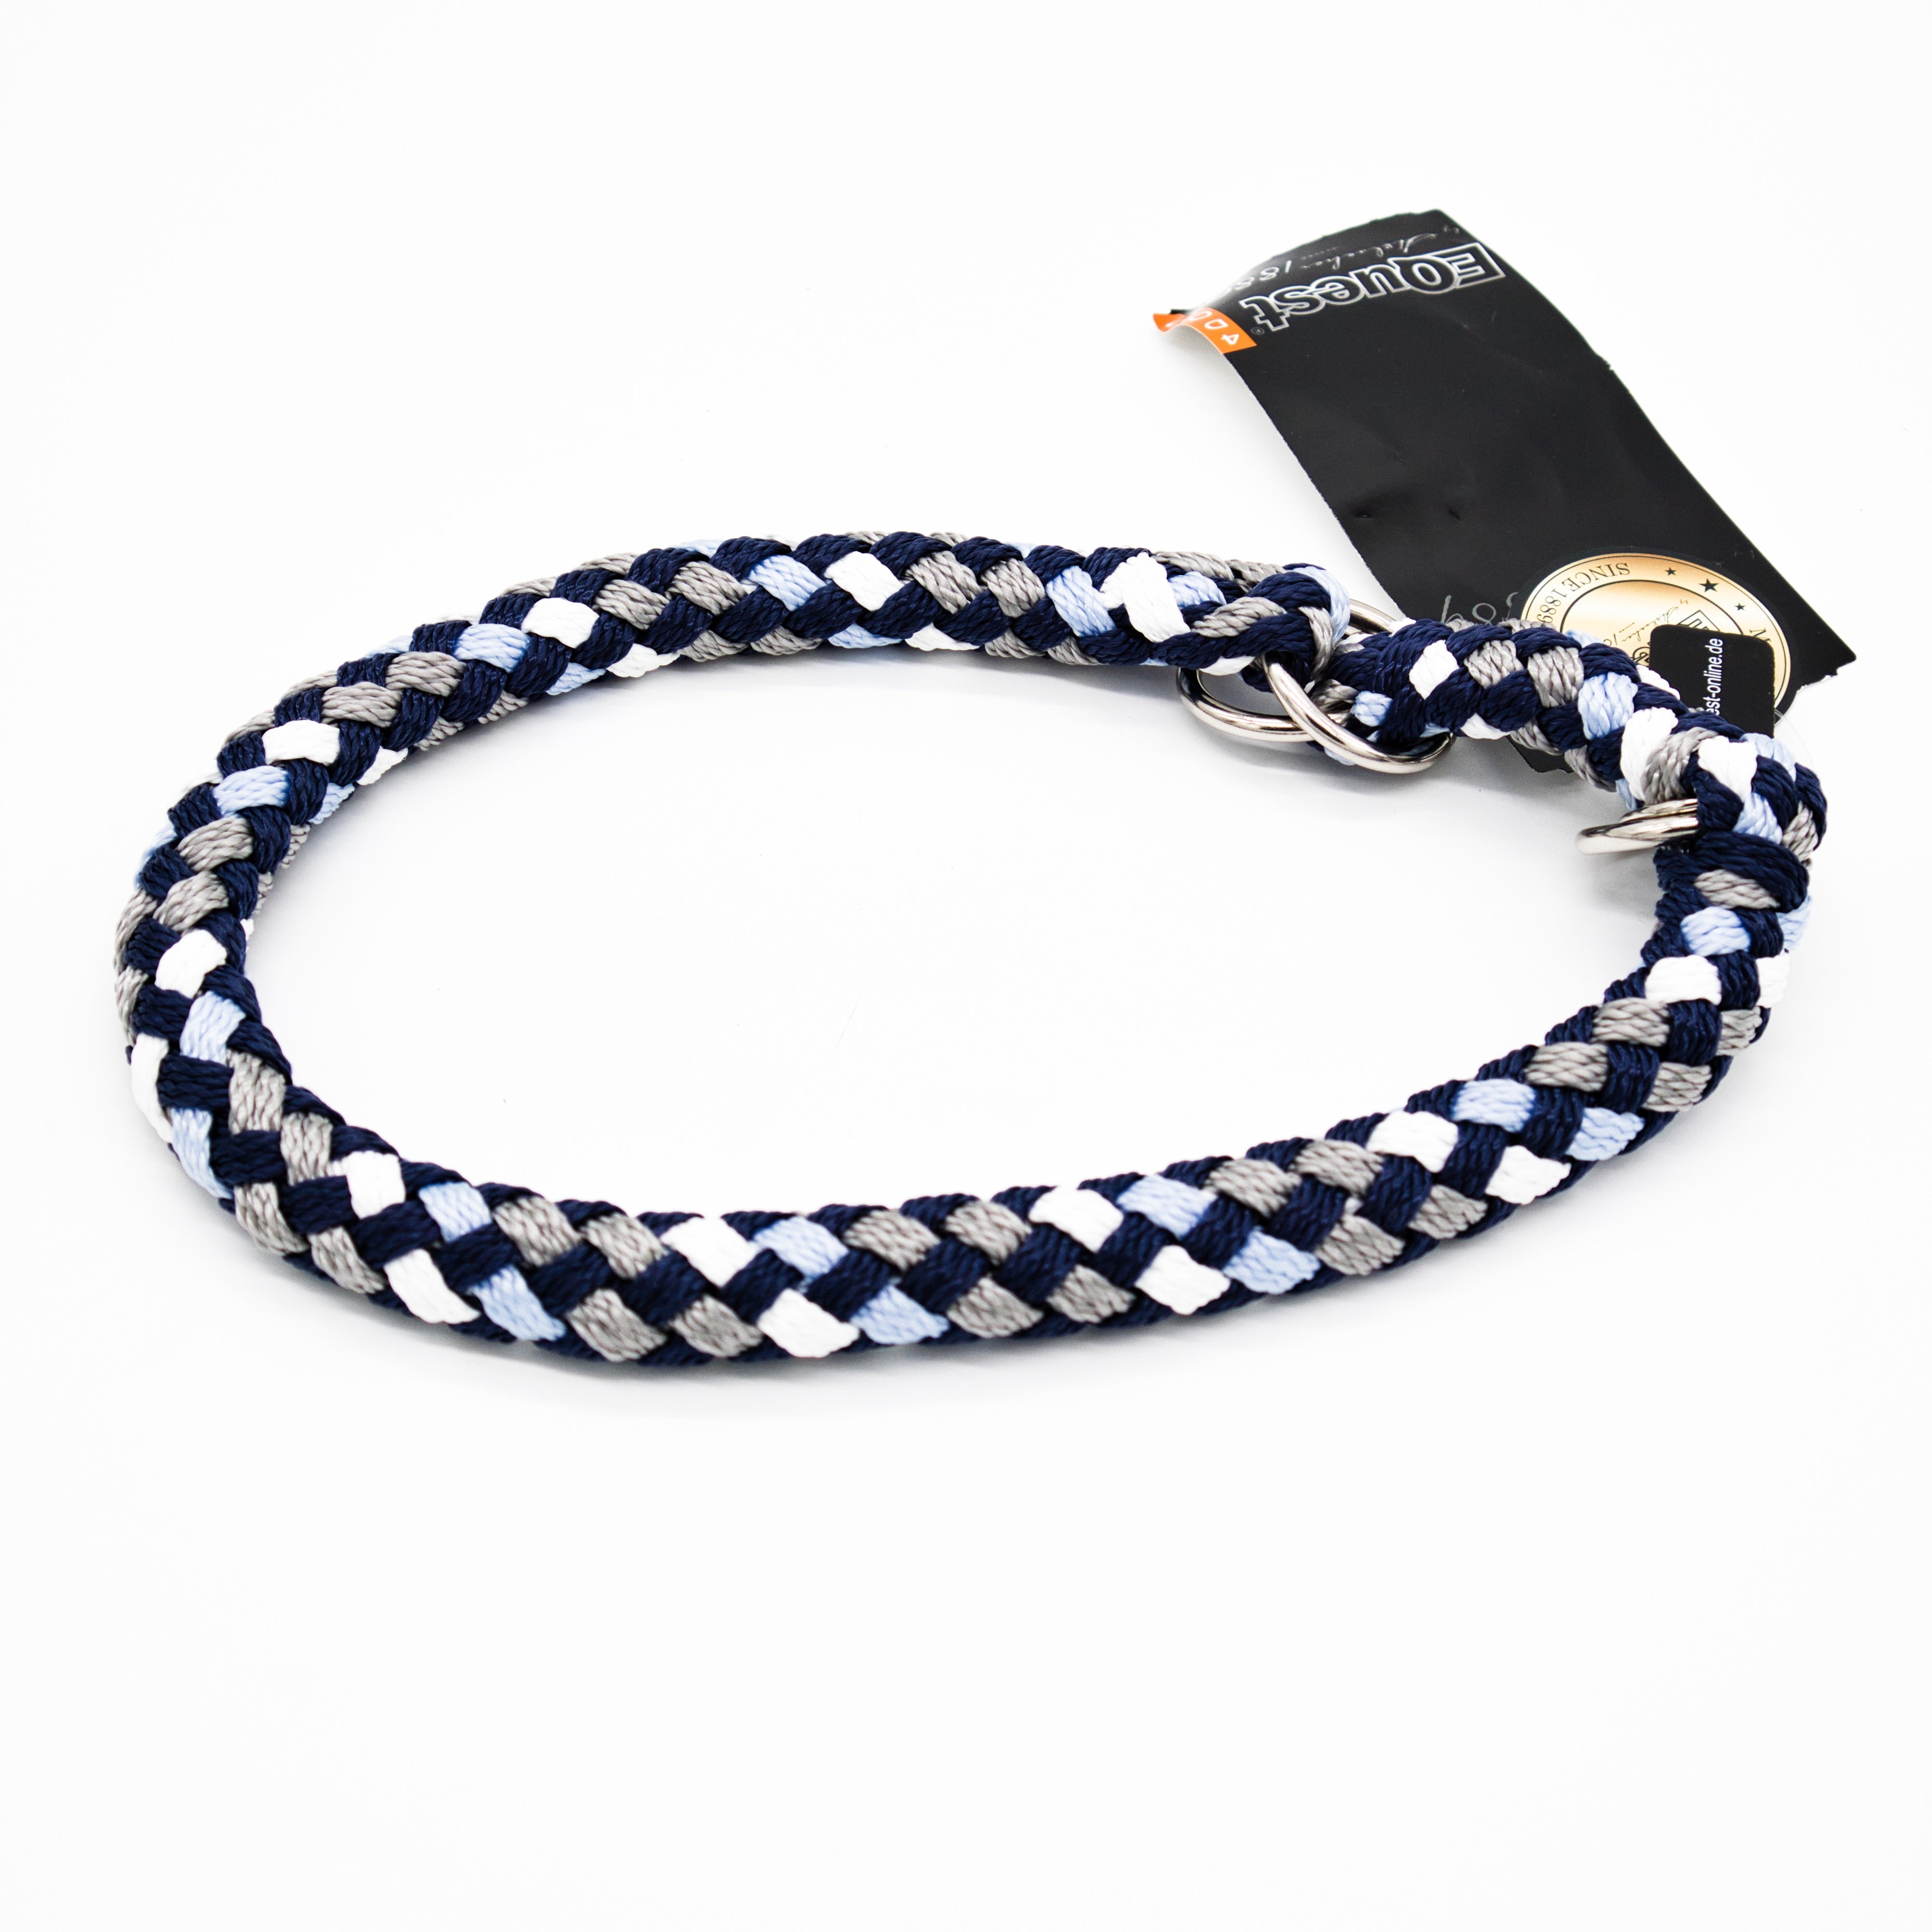 EQuest Halsband Ultimo mit Zugstop - 17 mm